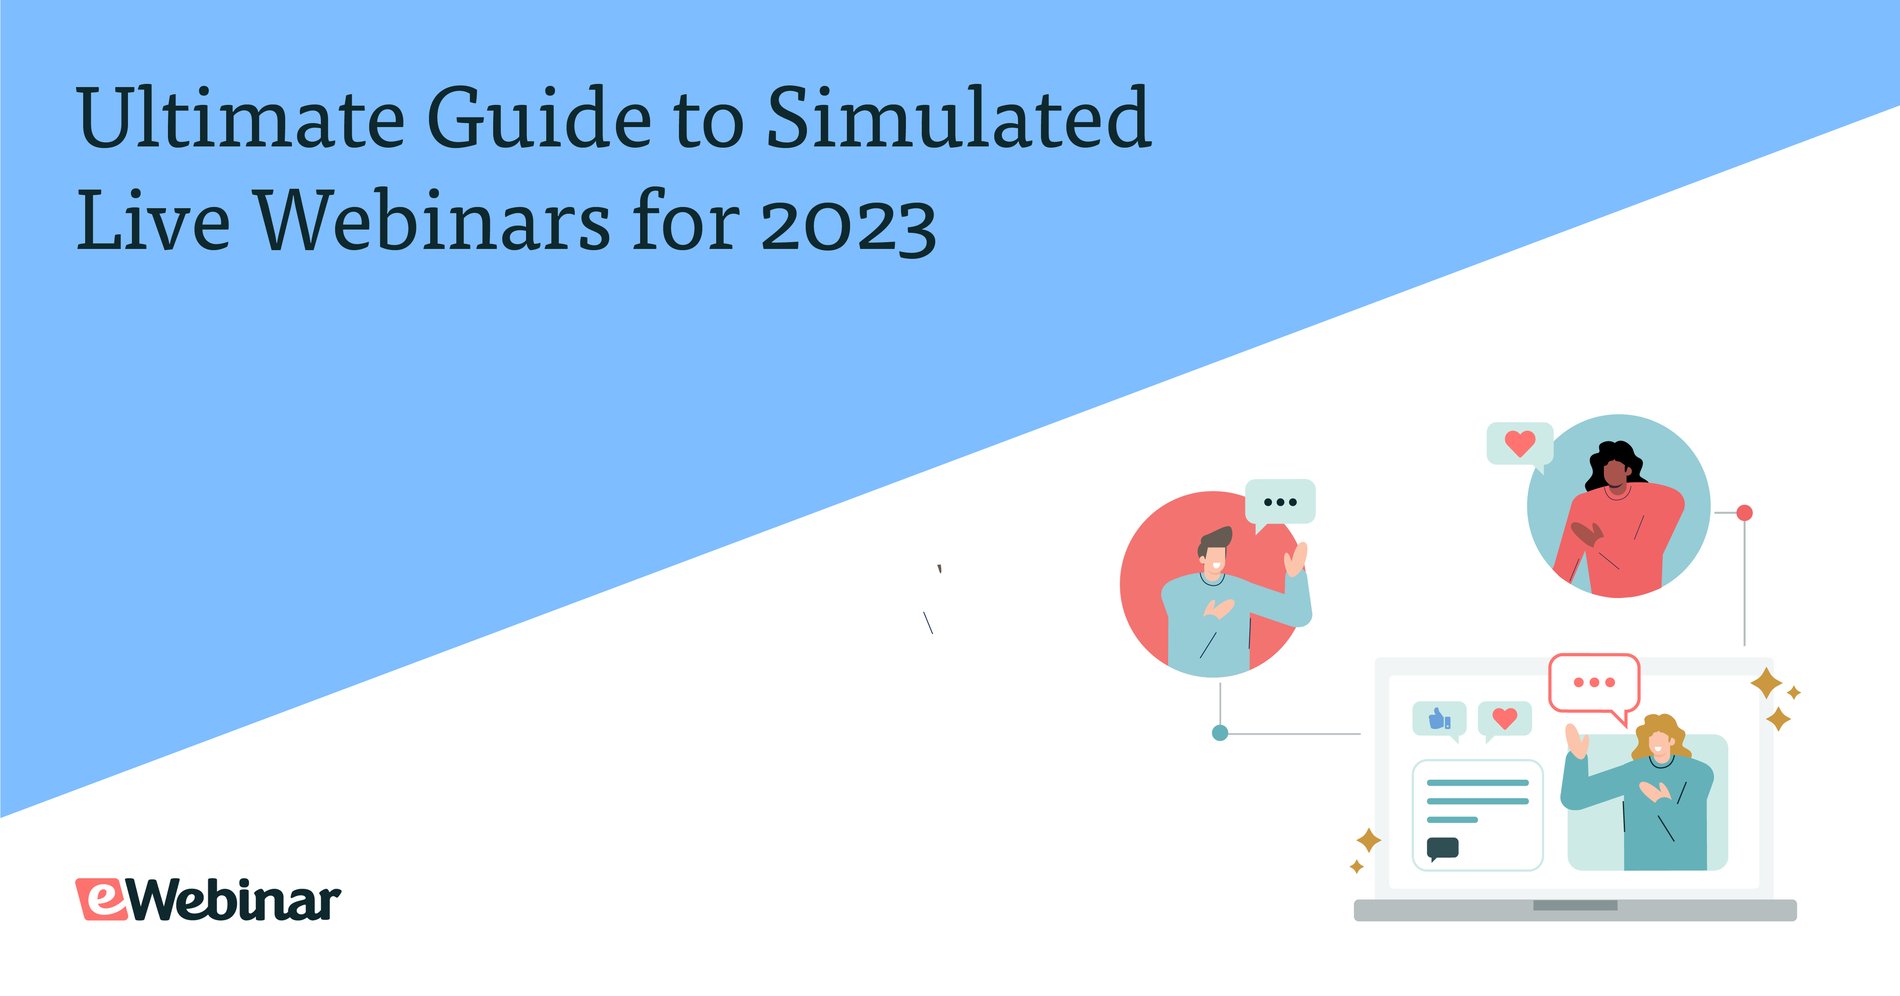 Ultimate Guide to Simulated Live Webinars for 2023